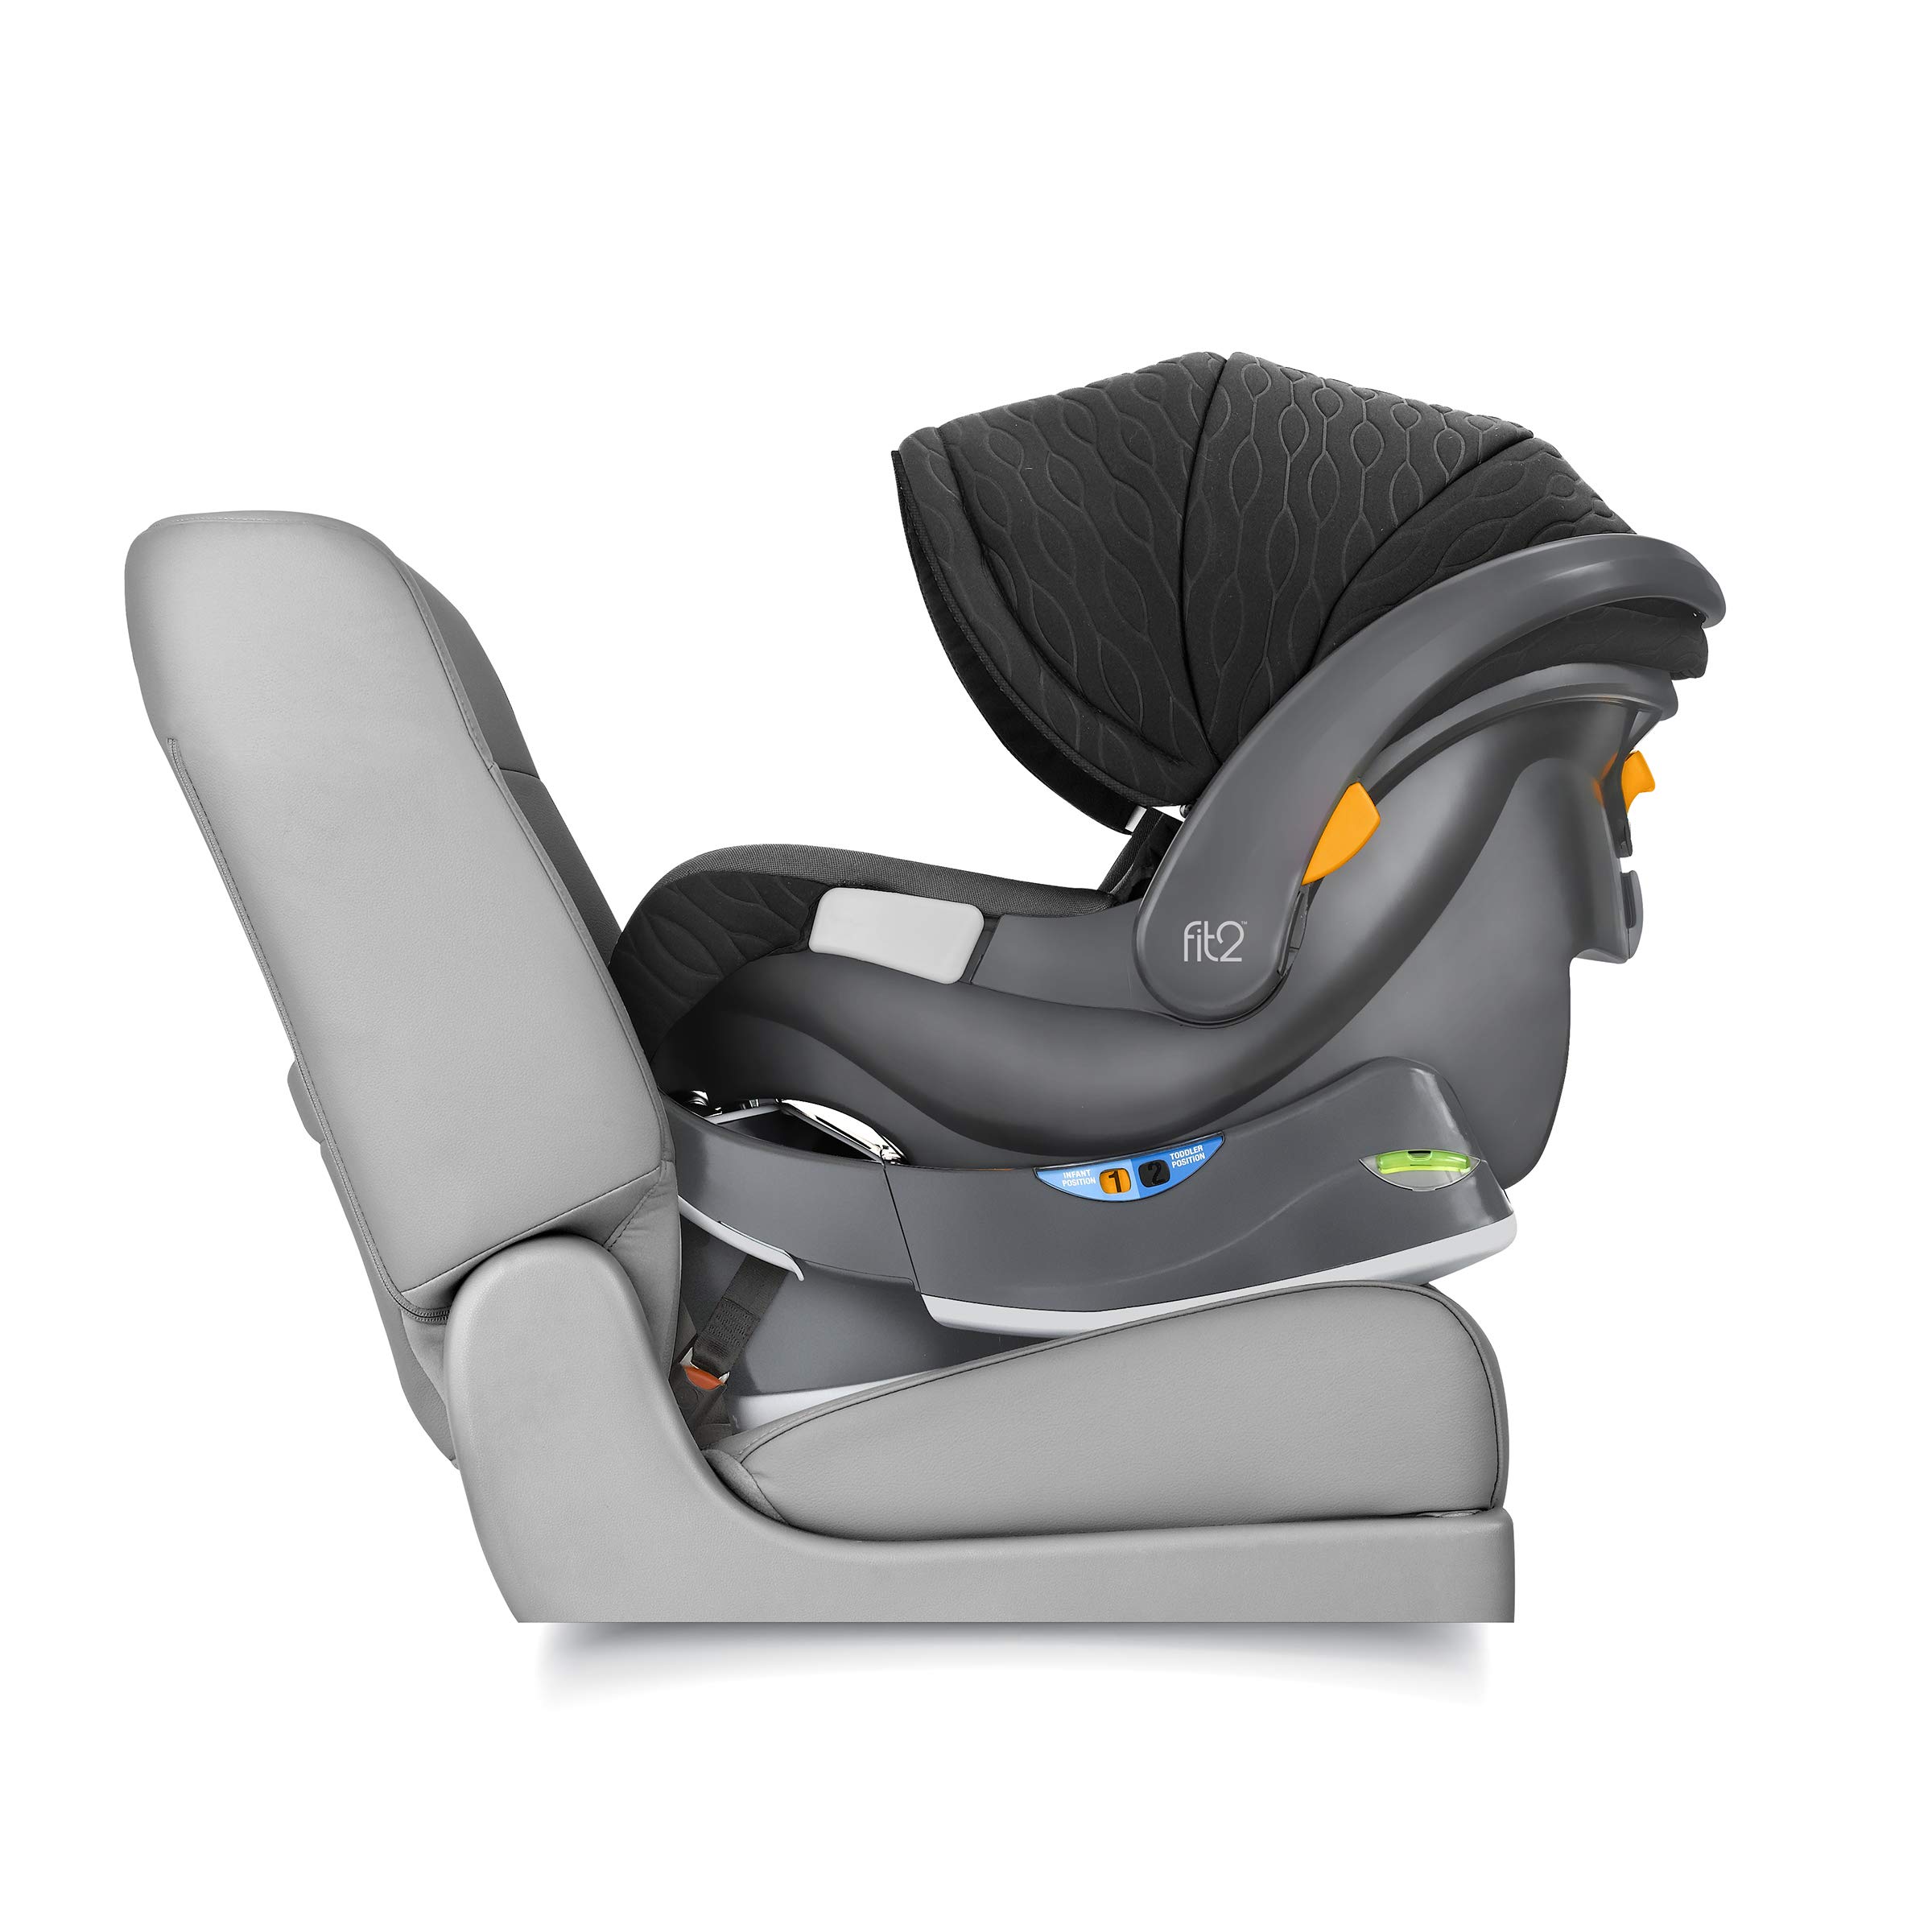 Chicco Fit2 Infant and Toddler Car Seat and Base, Rear-Facing Seat for Infants and Toddlers 4-35 lbs., Compatible with Chicco Strollers, Baby Travel Gear | Staccato/Black